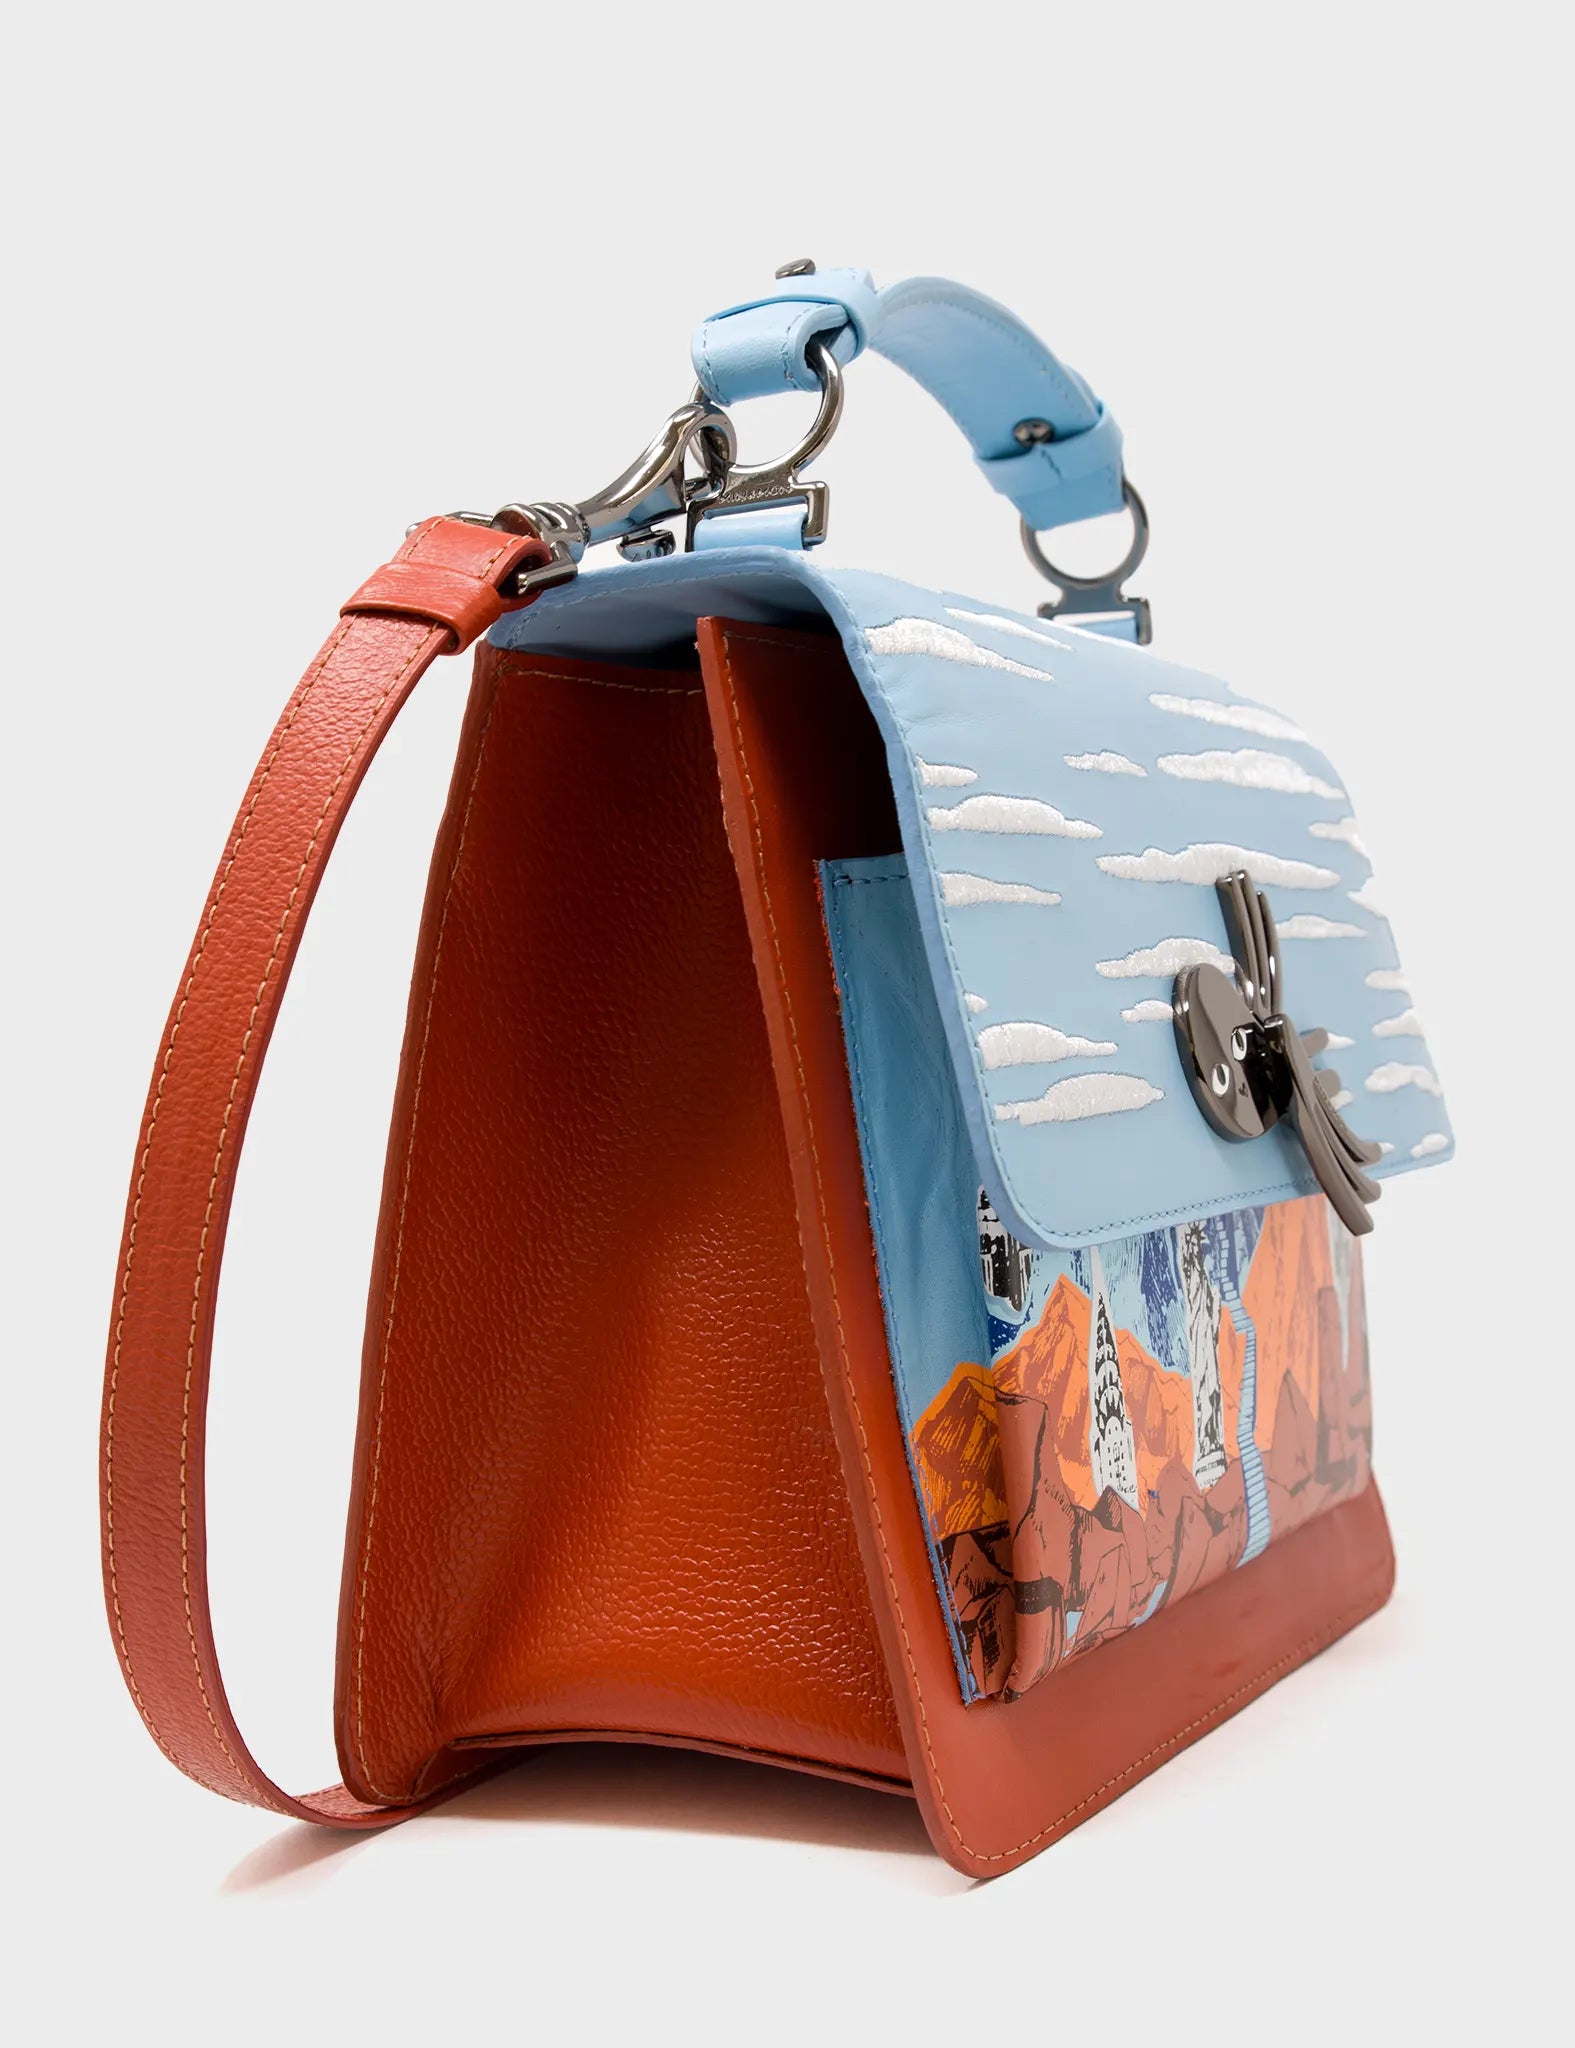 Cinnamon Medium Leather Crossbody Bag - Clouds and Mountains Design - Side